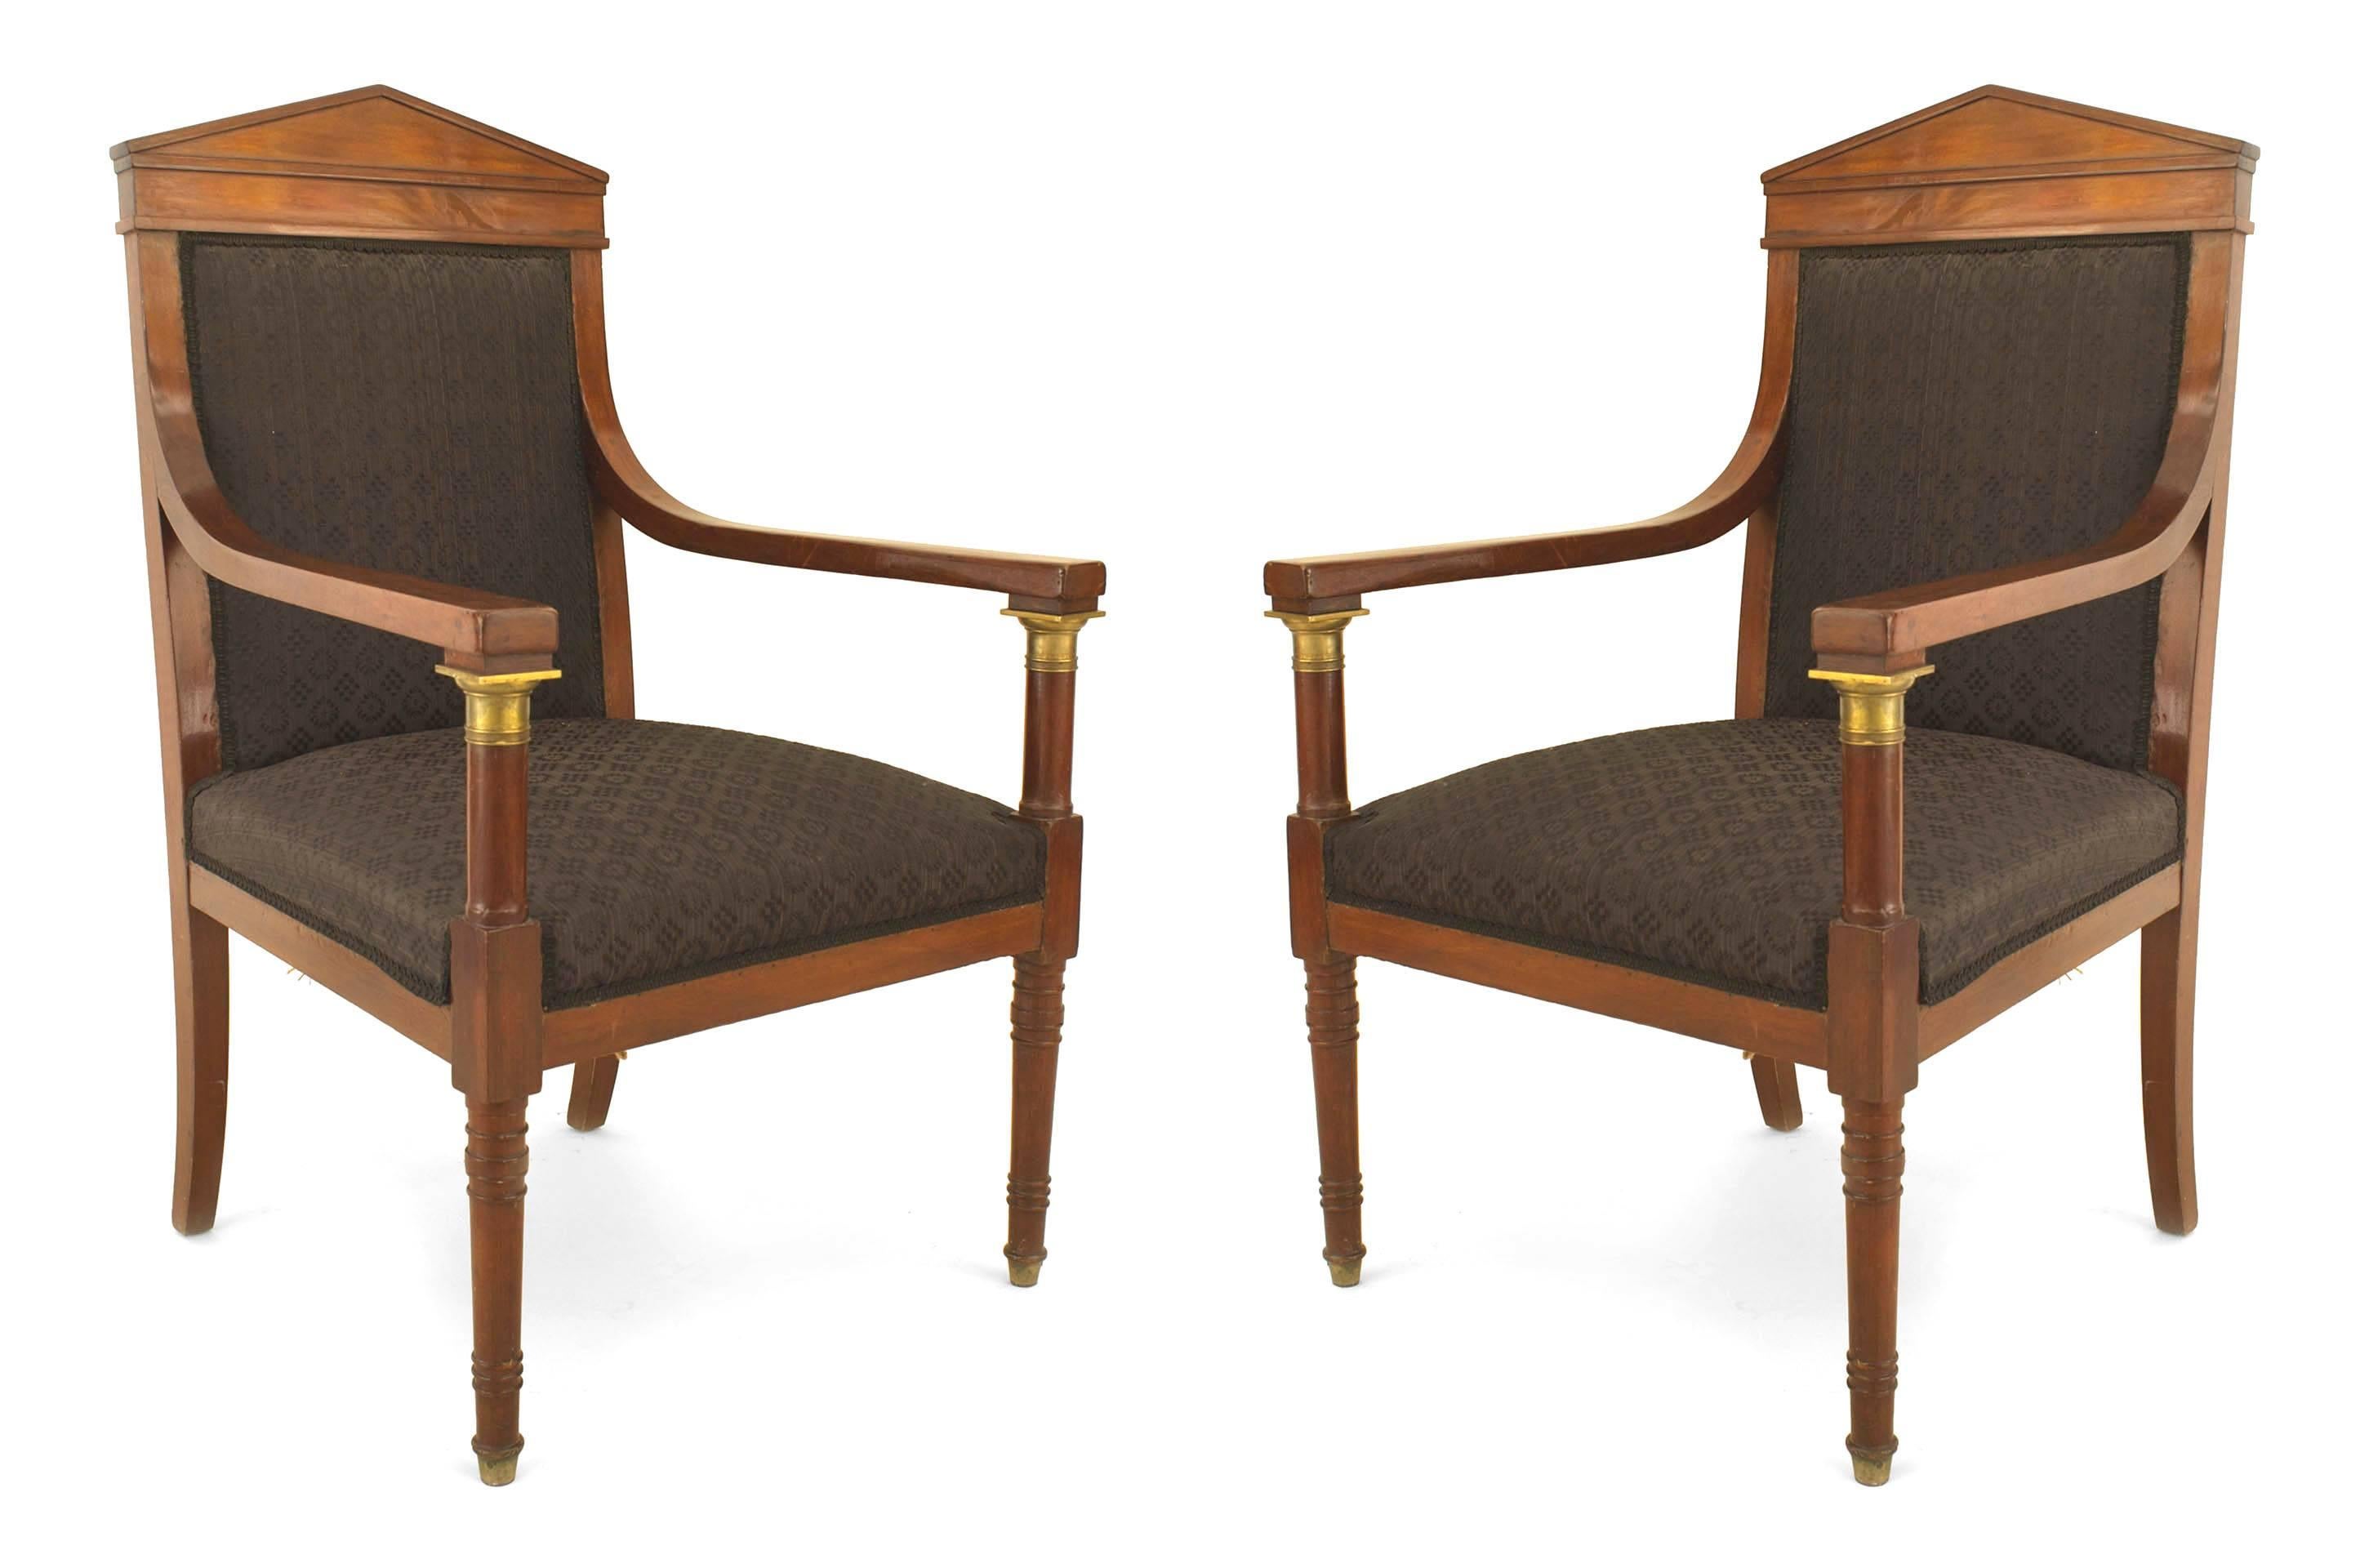 PAIR of French Empire (19th C) mahogany open arm chairs with a pediment back & black upholstery having arms supported by bronze mounted columns and supported on turned front & saber rear legs.
